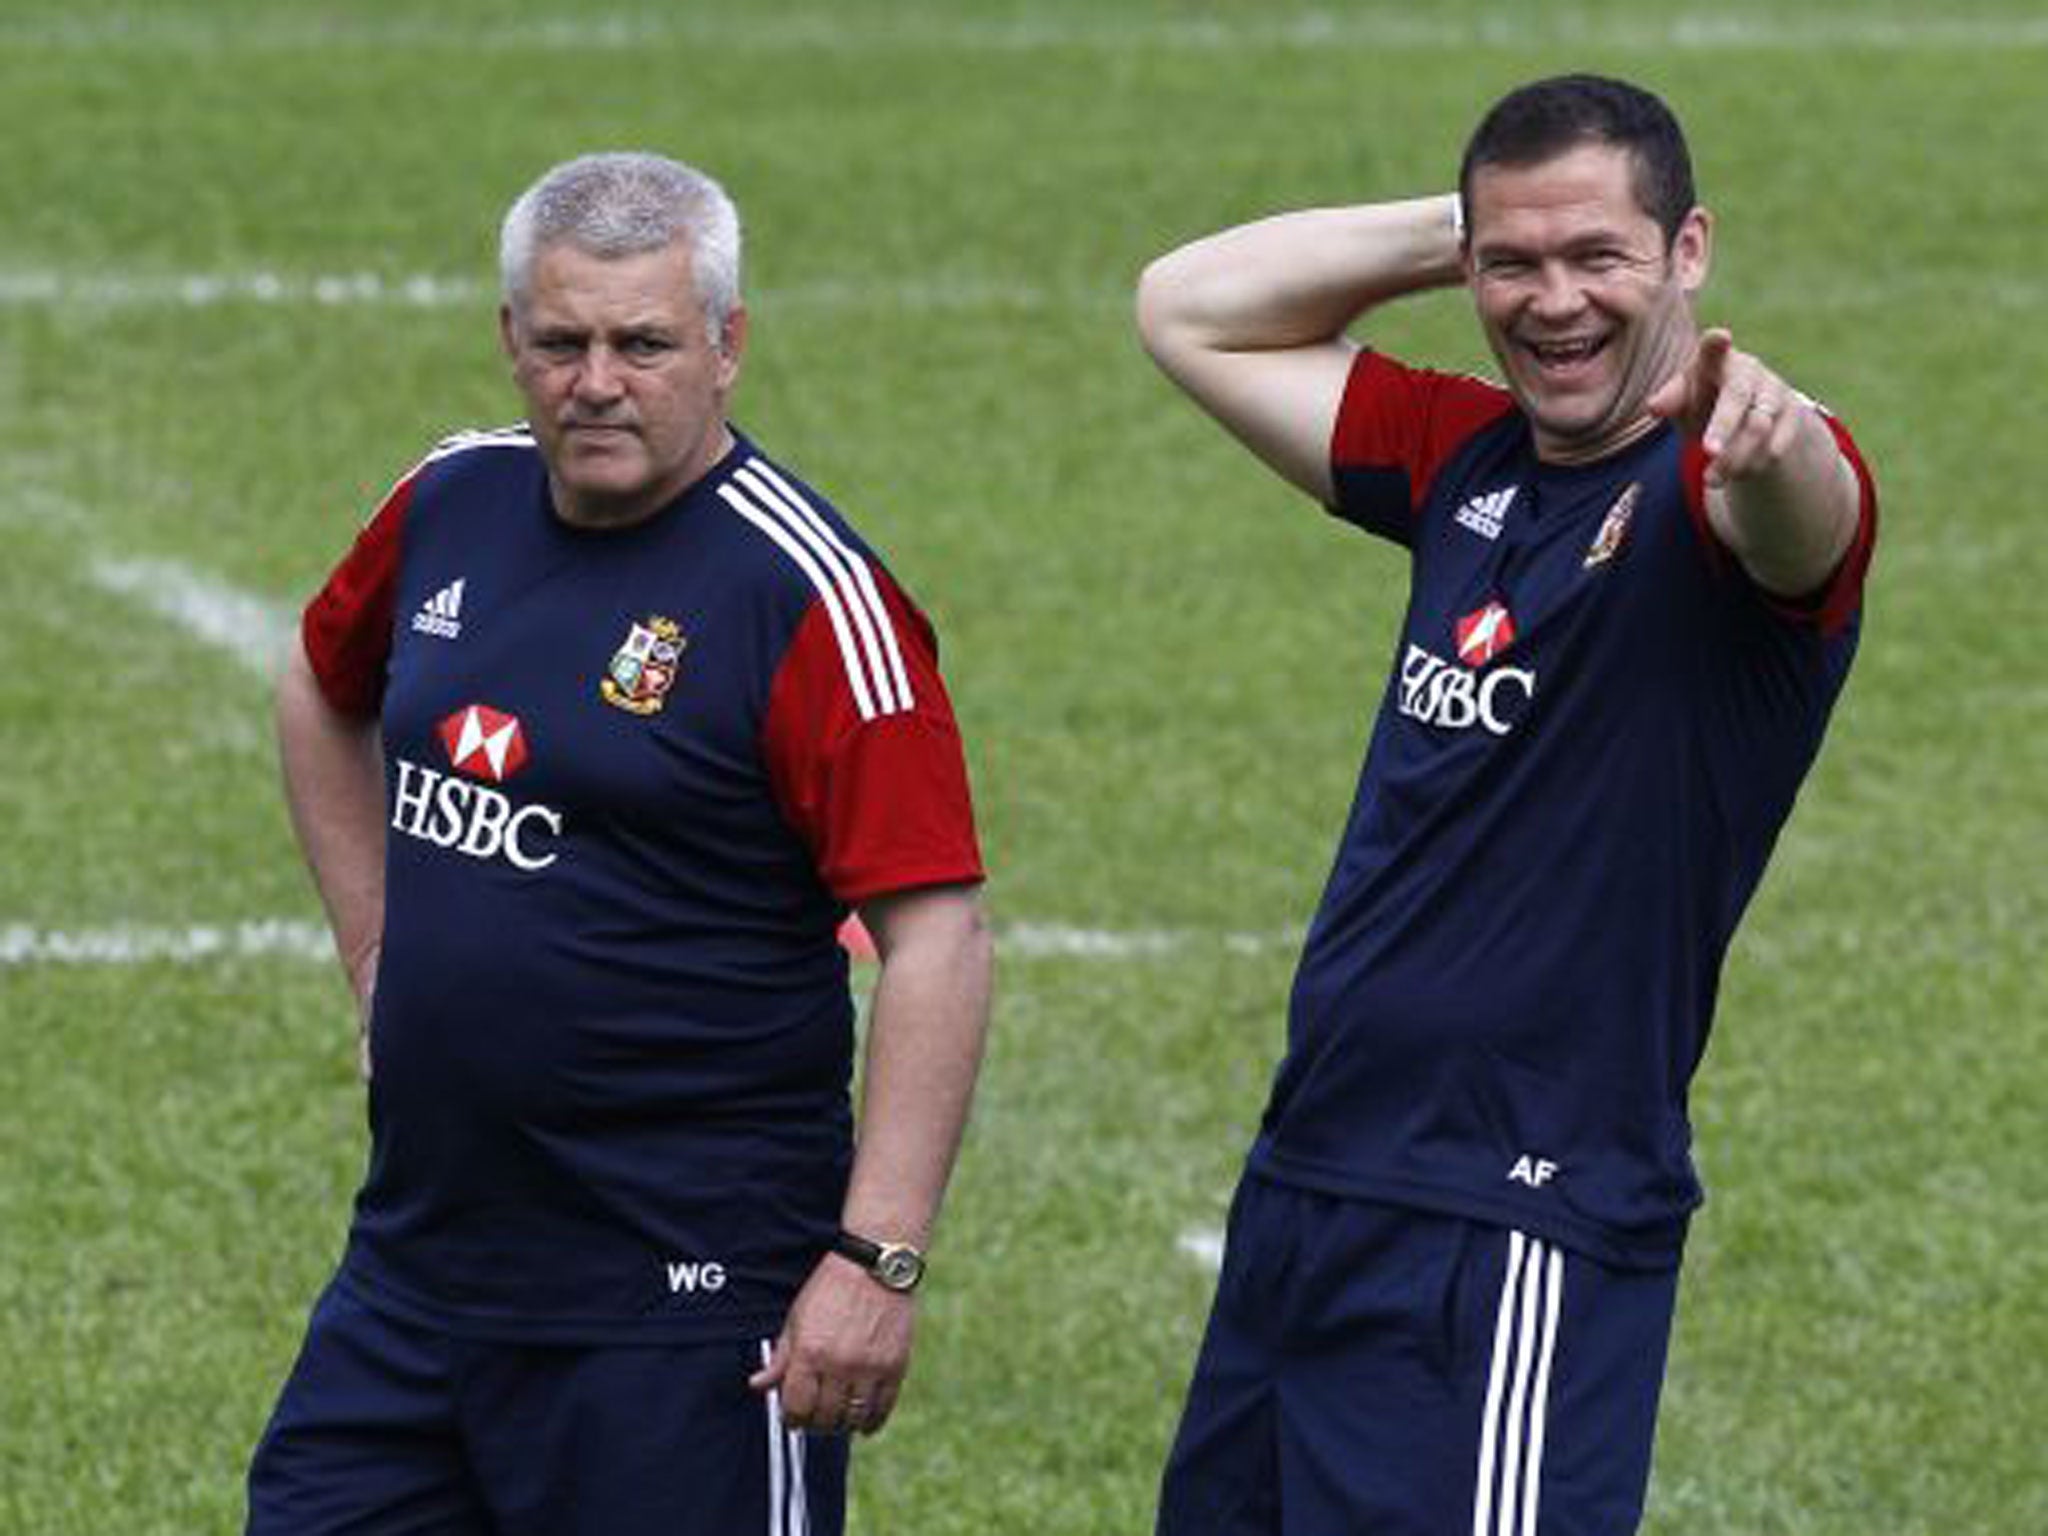 Us Welsh guys need to get used to how Andy Farrell likes to set his teams up